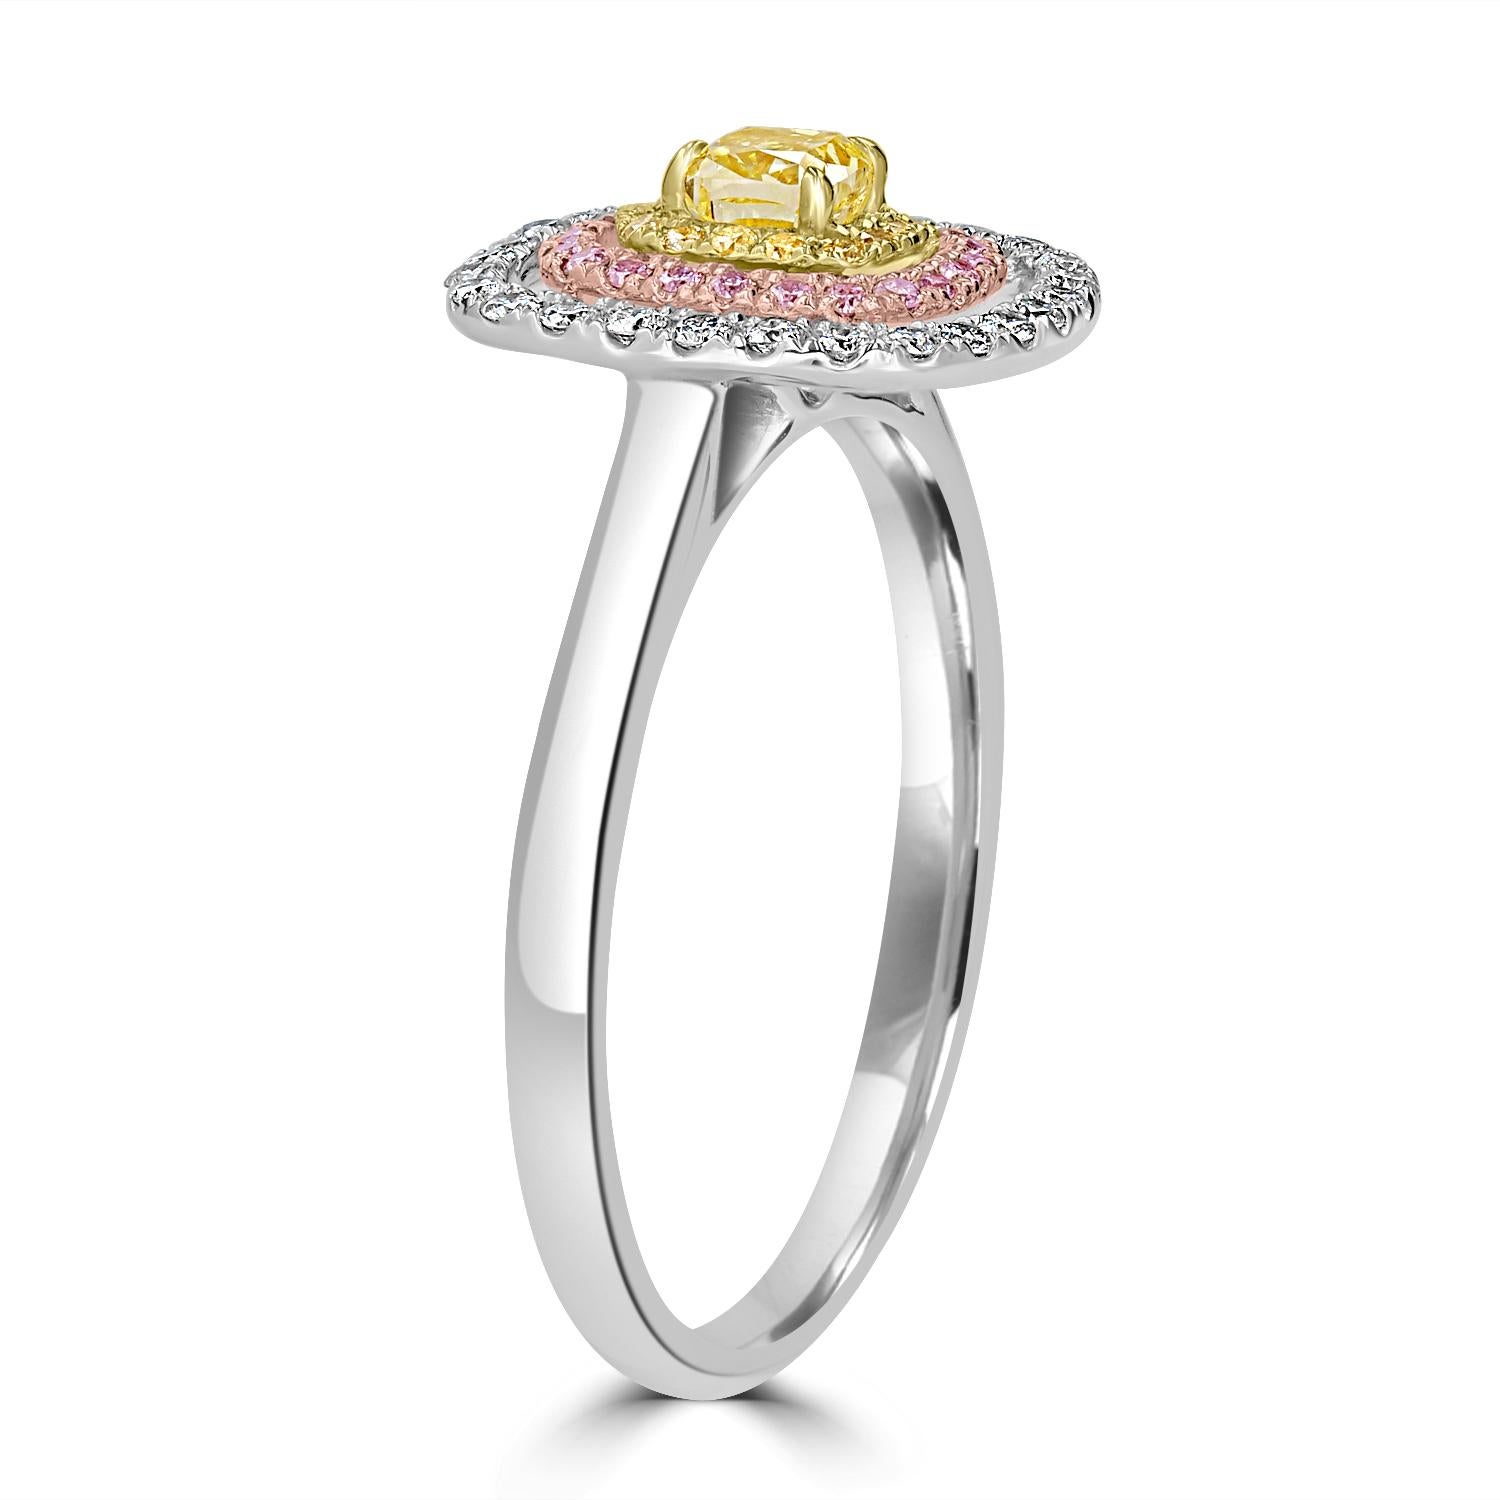 Contemporary 0.27 Carat Yellow Diamond Solitaire with Yellow, Pink and White Diamond Halos